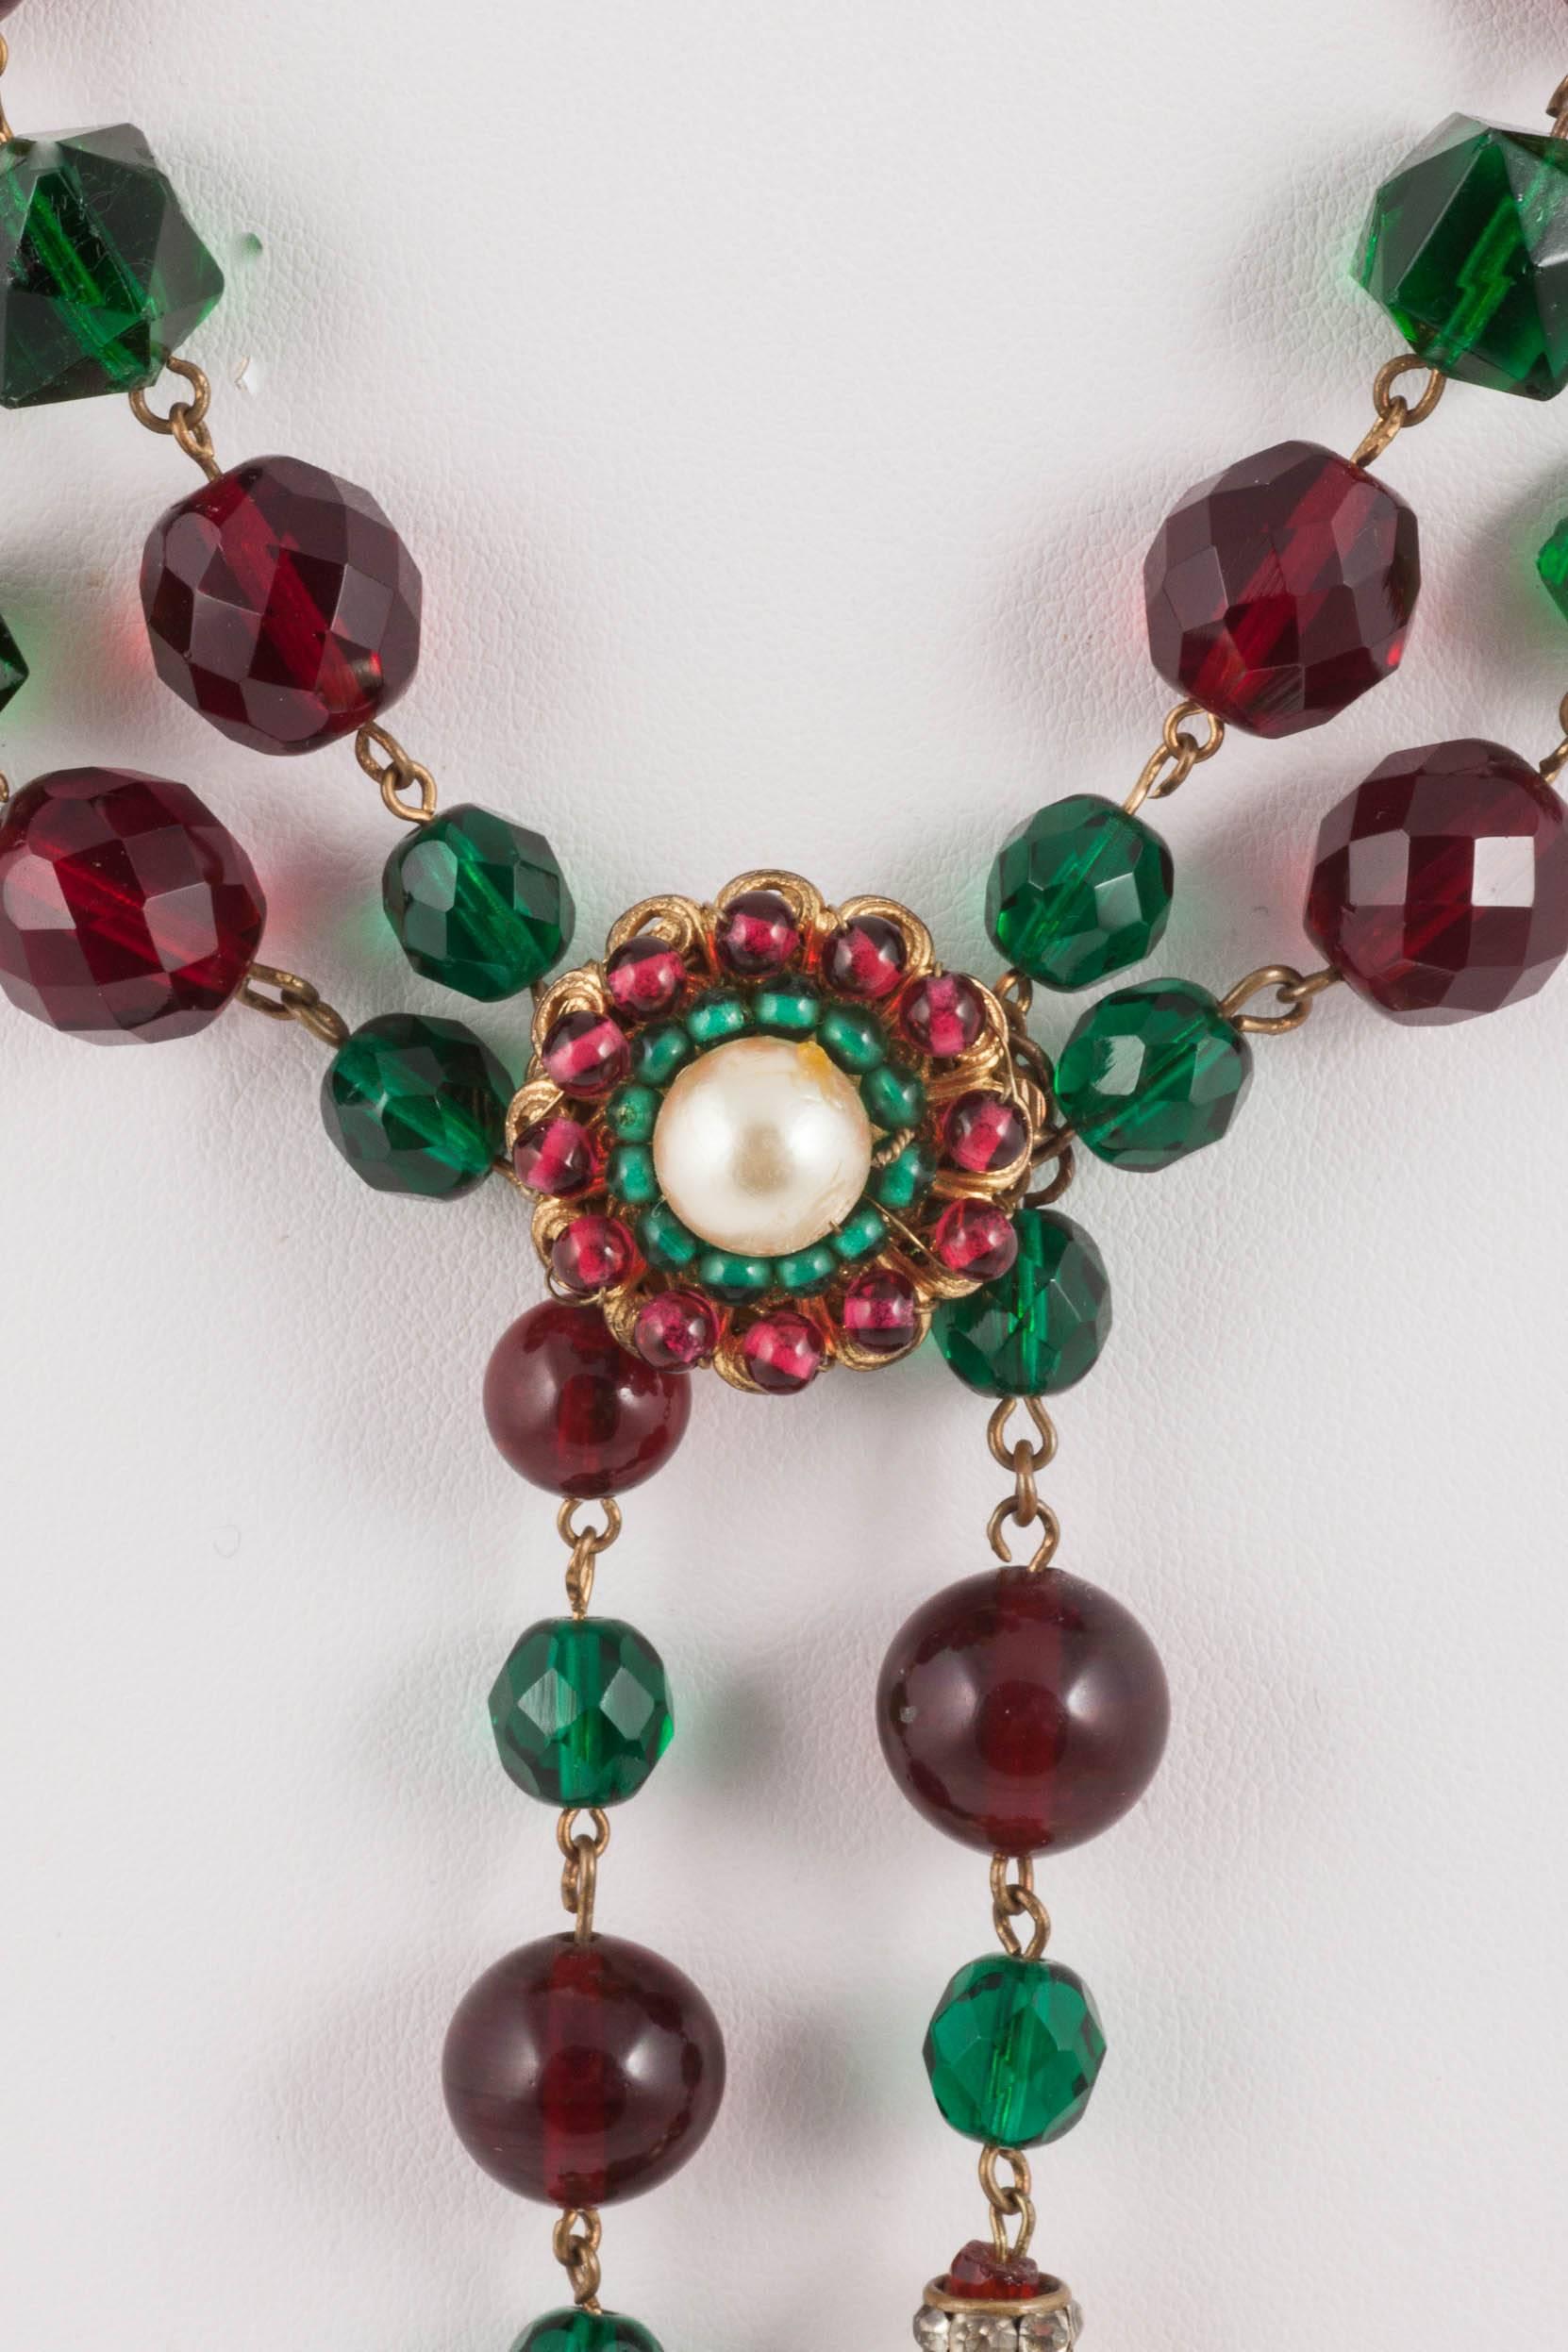 Wonderful, stylish and beautifully made double tassle/sautoir necklace in both round and faceted beads, pearls and paste rondelles. Highly typical of the Chanel style by Maison Gripoix from the 1930s, very wearable and highly collectable, in a